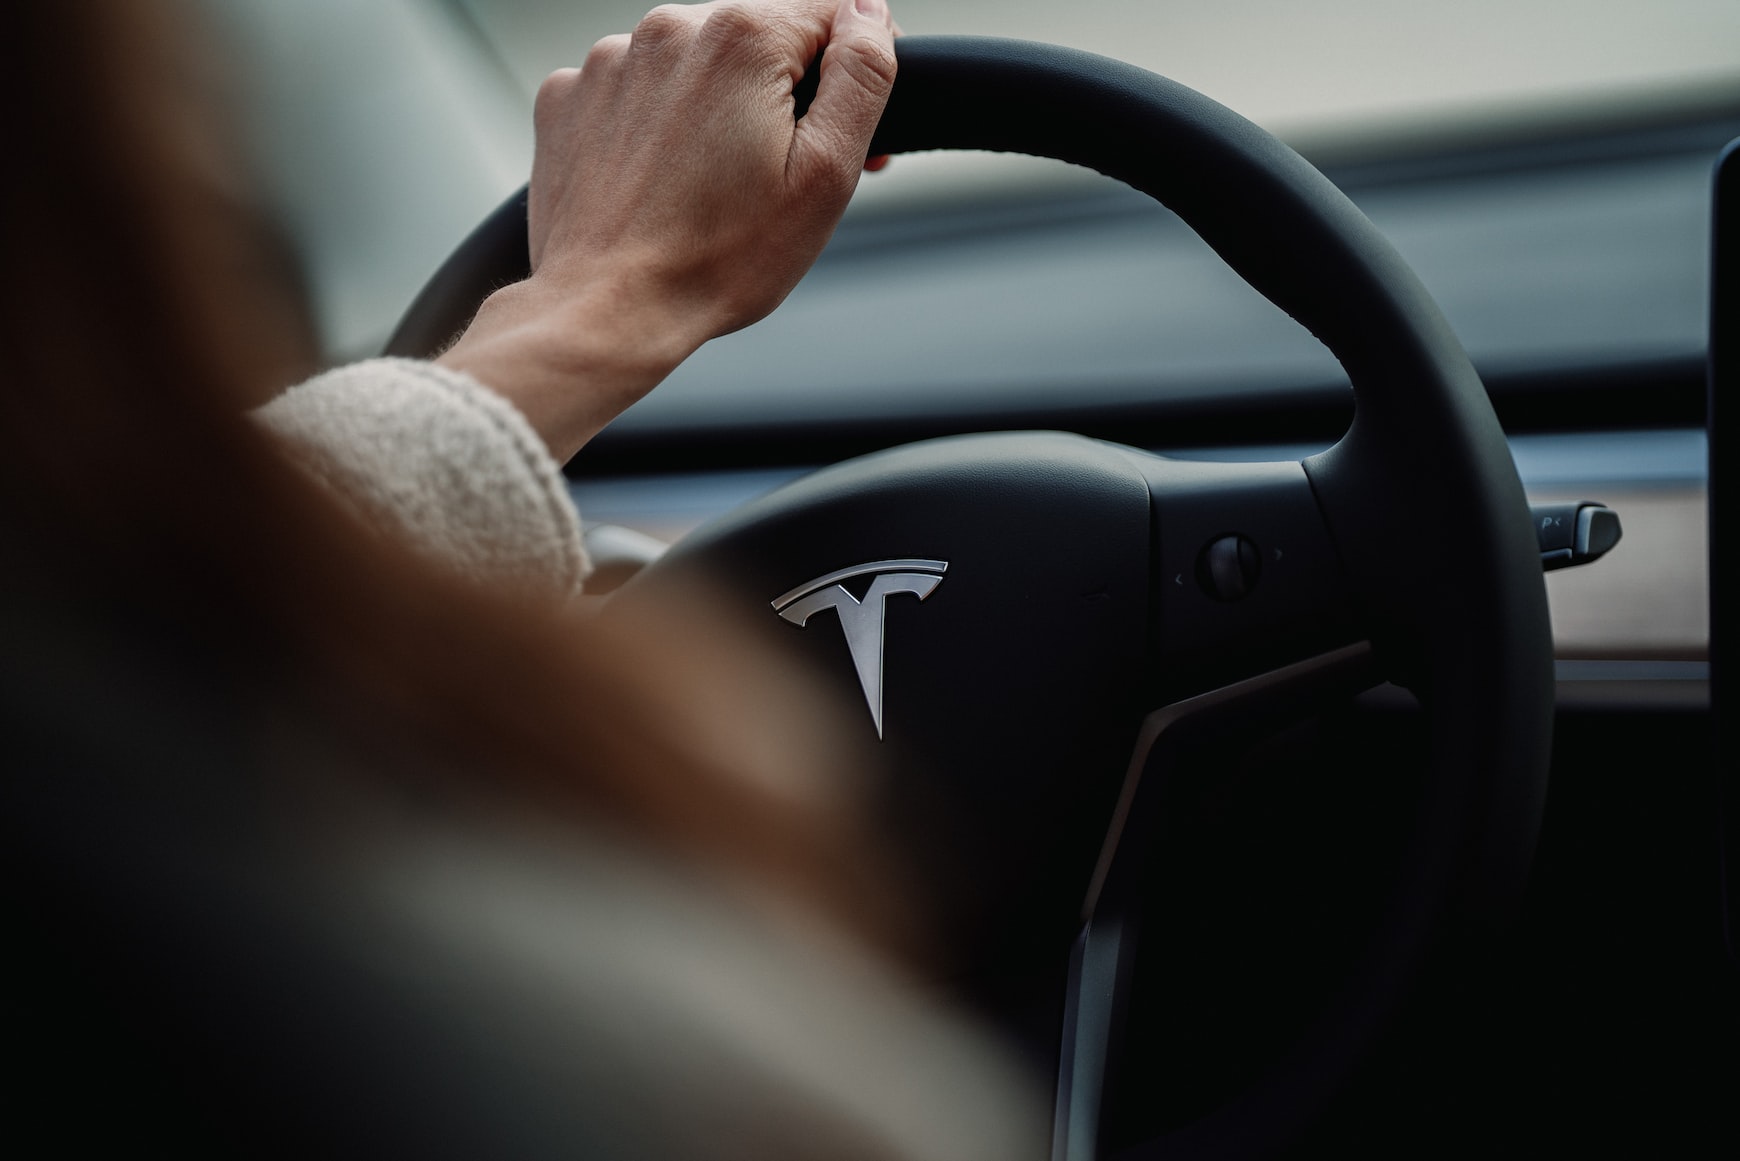 Tesla Autopilot Trial Will Determine if ‘Man or Machine’ Is Responsible For Fatal Crash